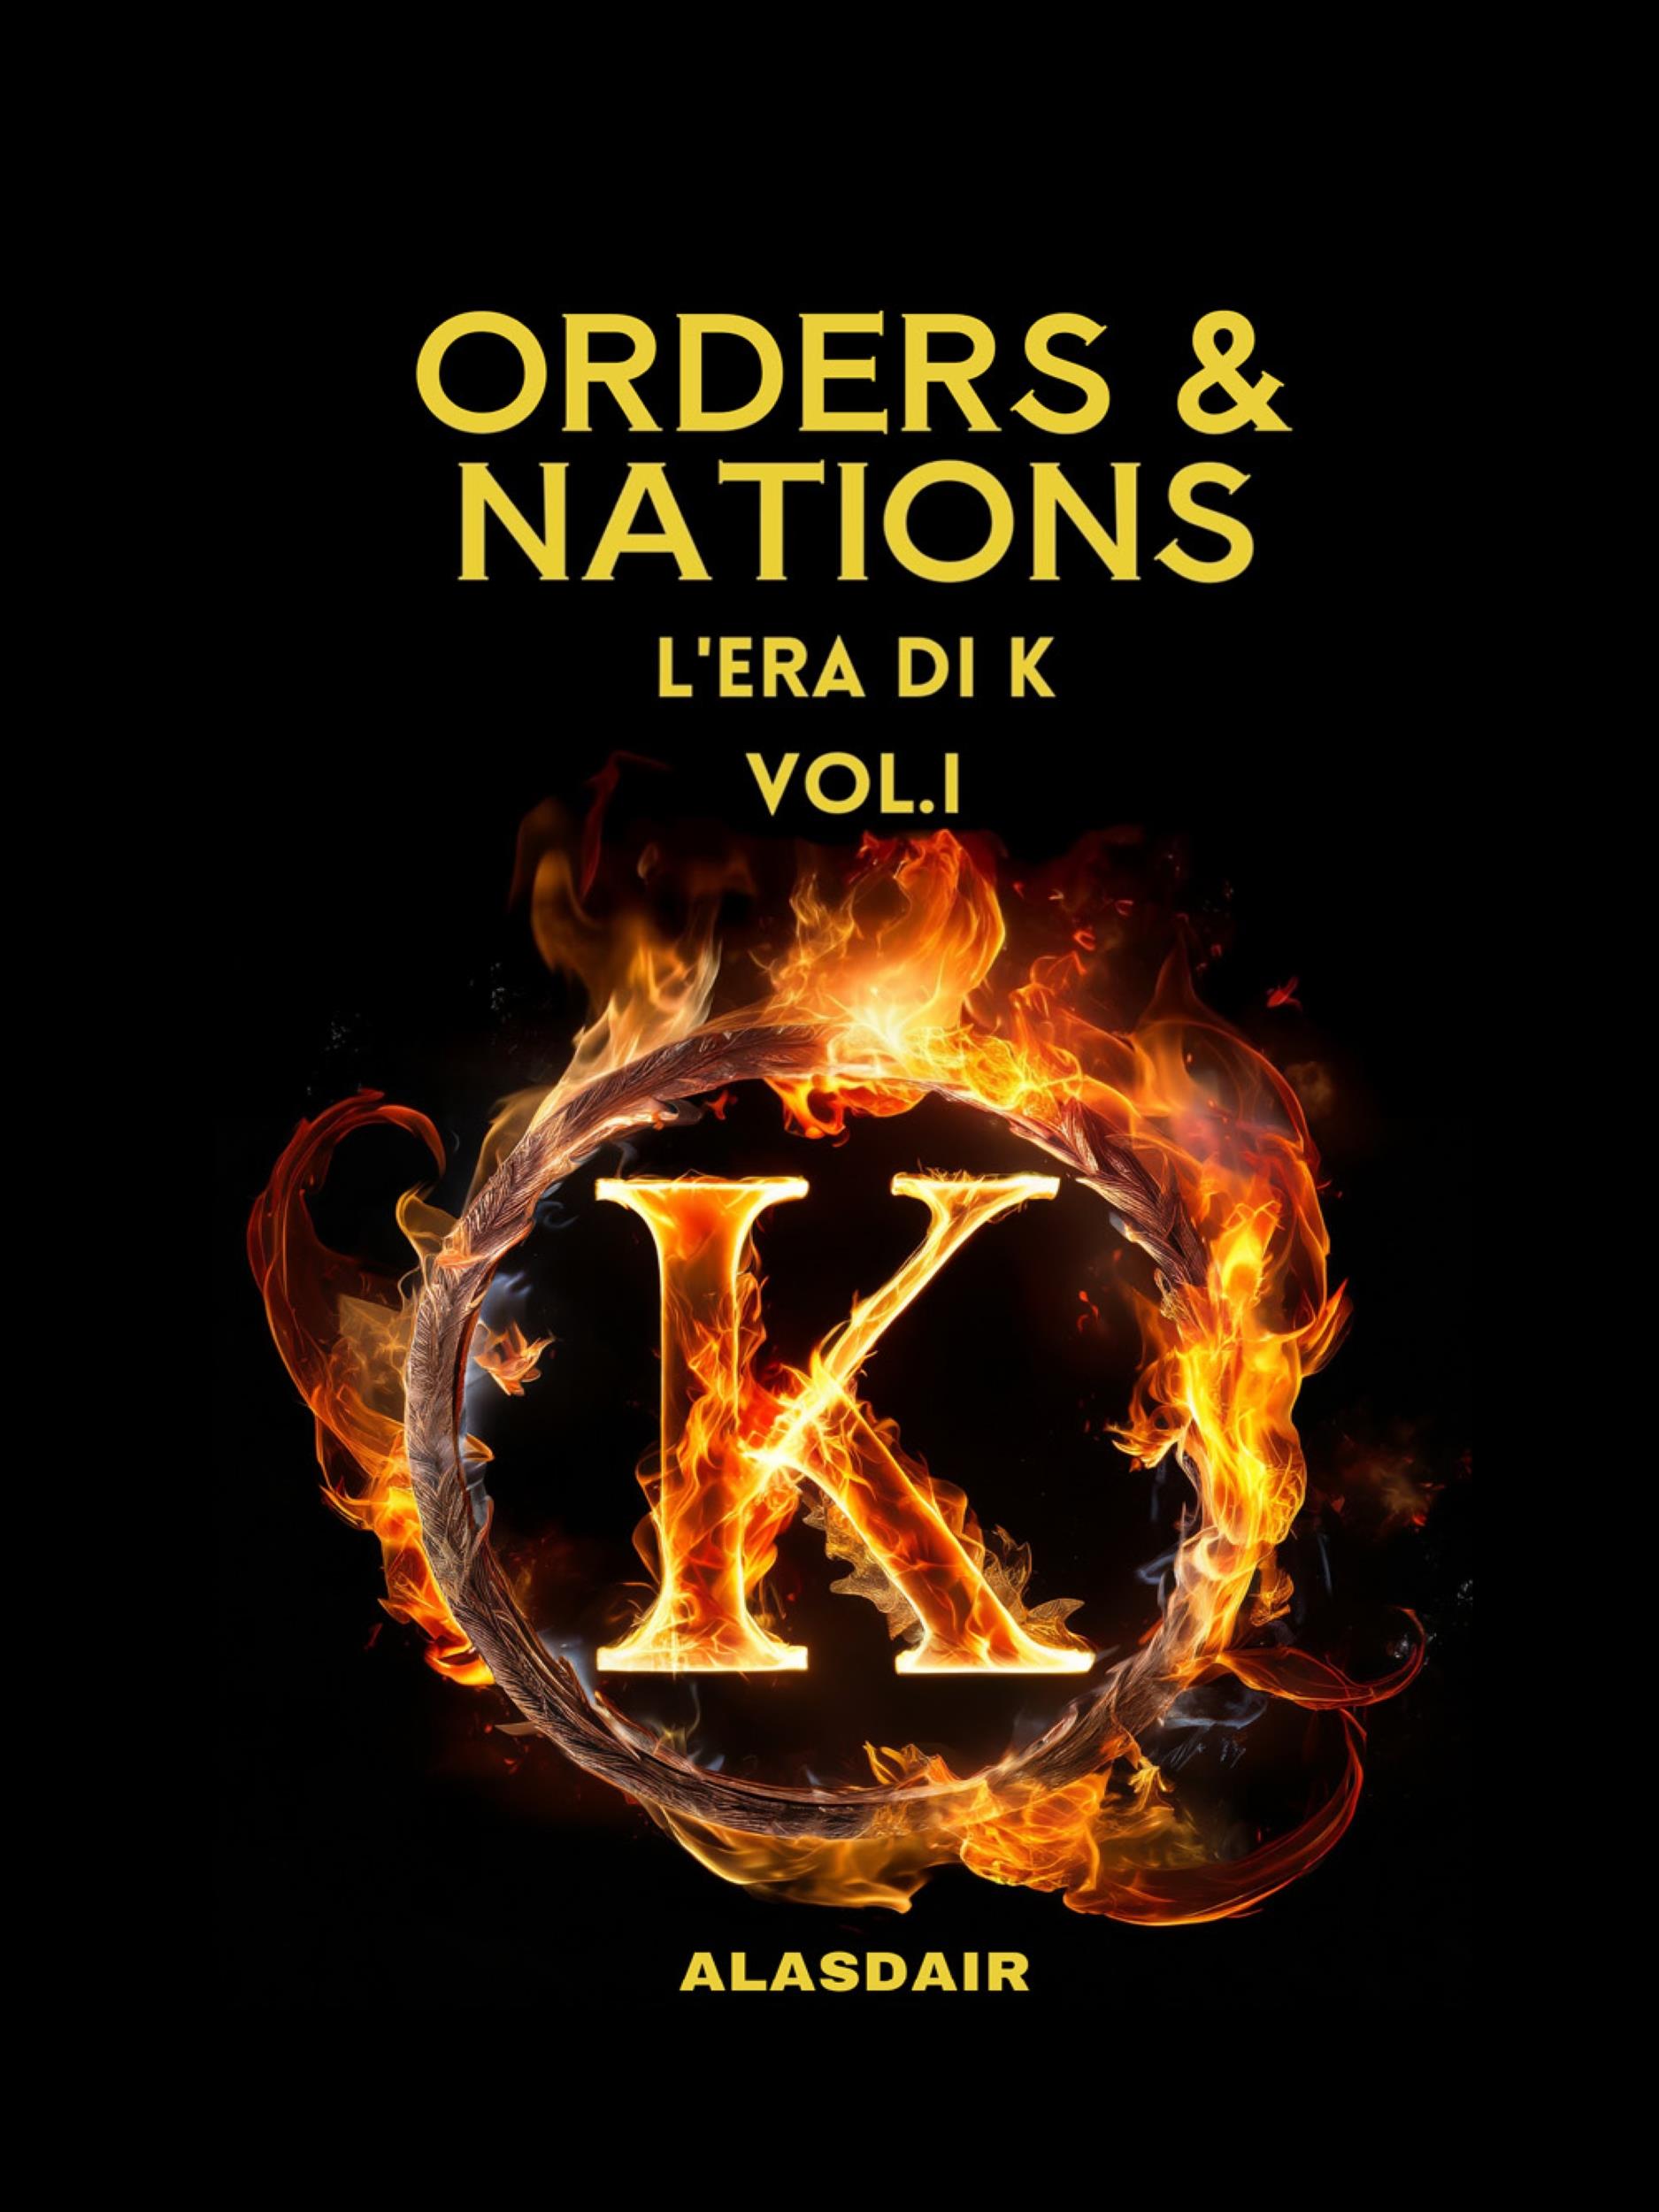 Orders & Nations